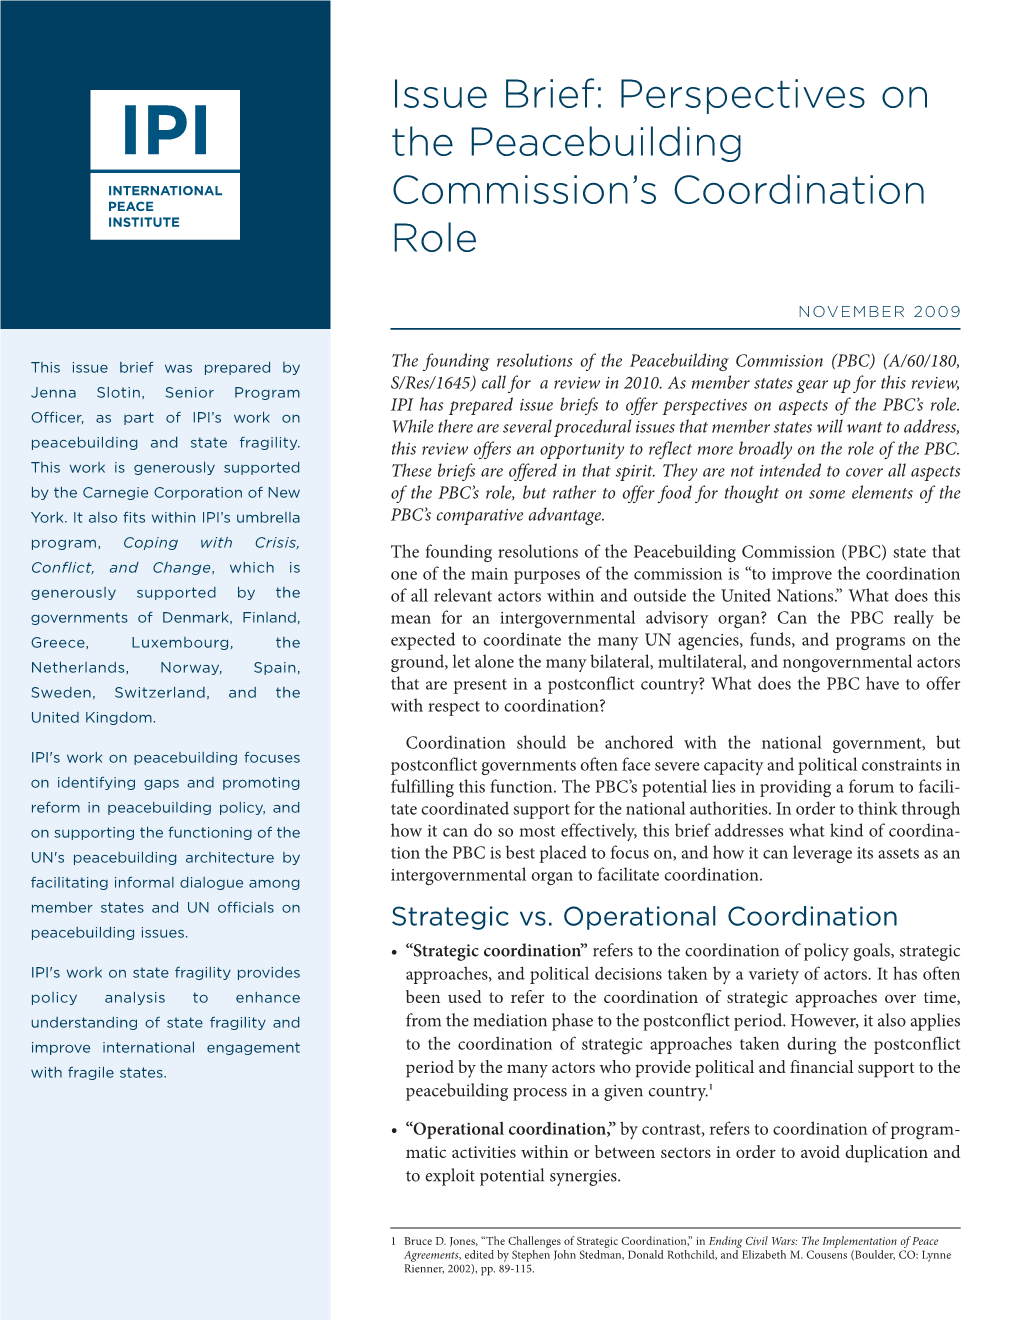 Issue Brief: Perspectives on the Peacebuilding Commission's